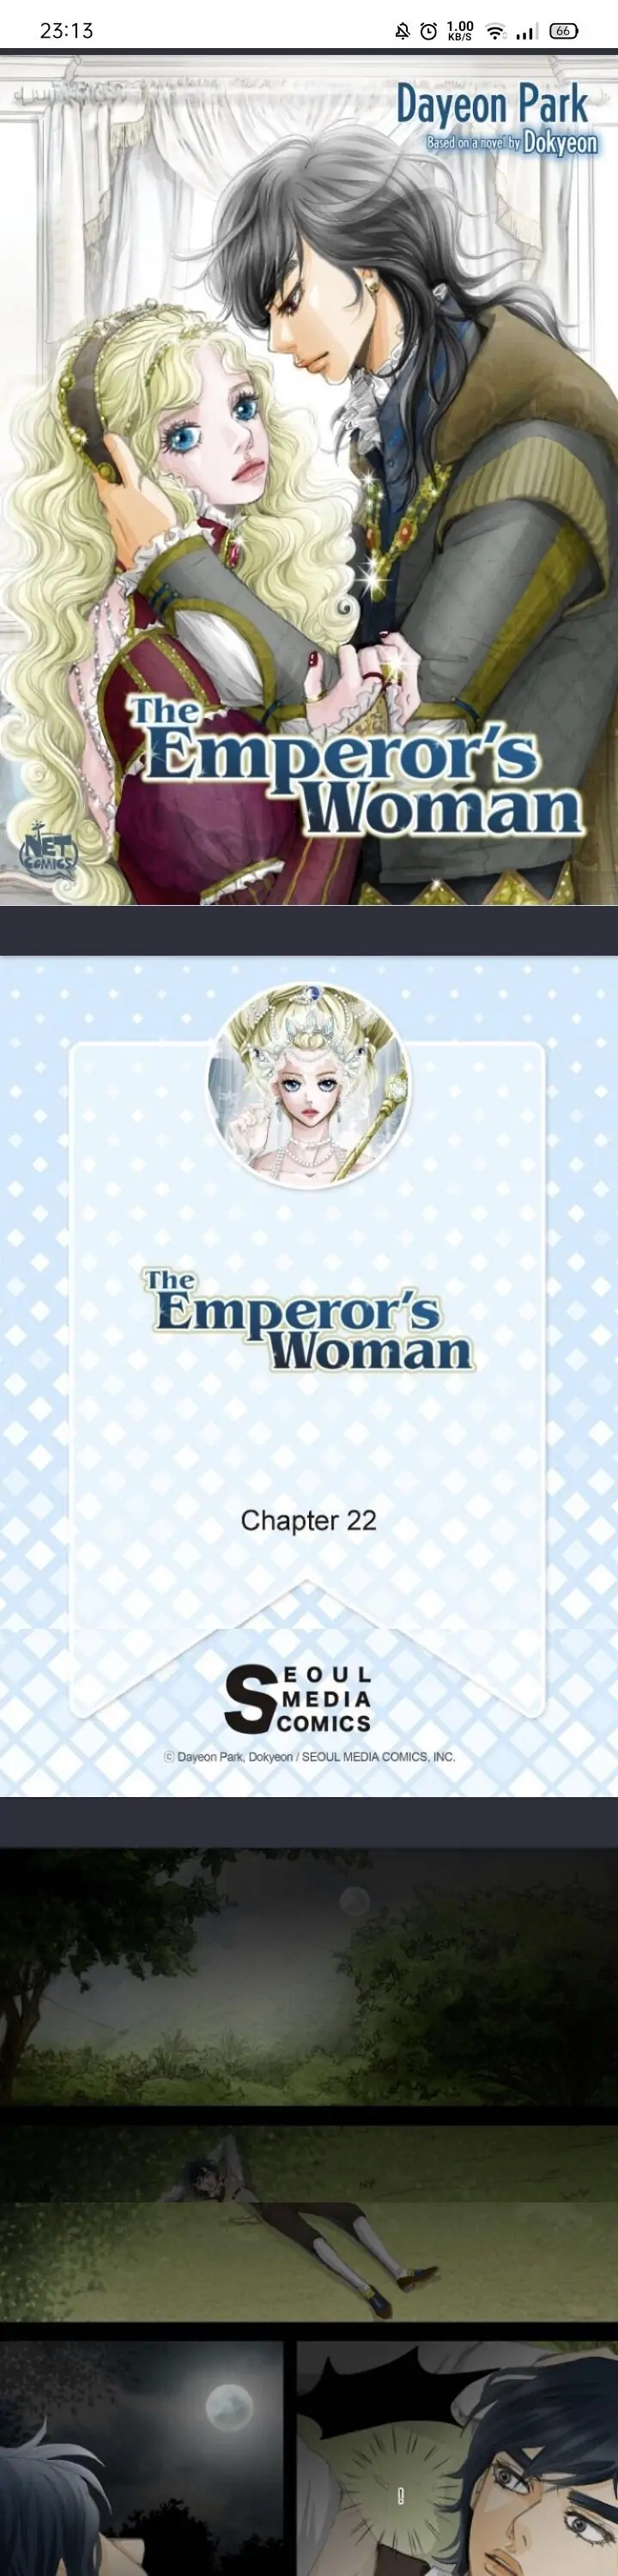 The Emperor’s Woman chapter 22